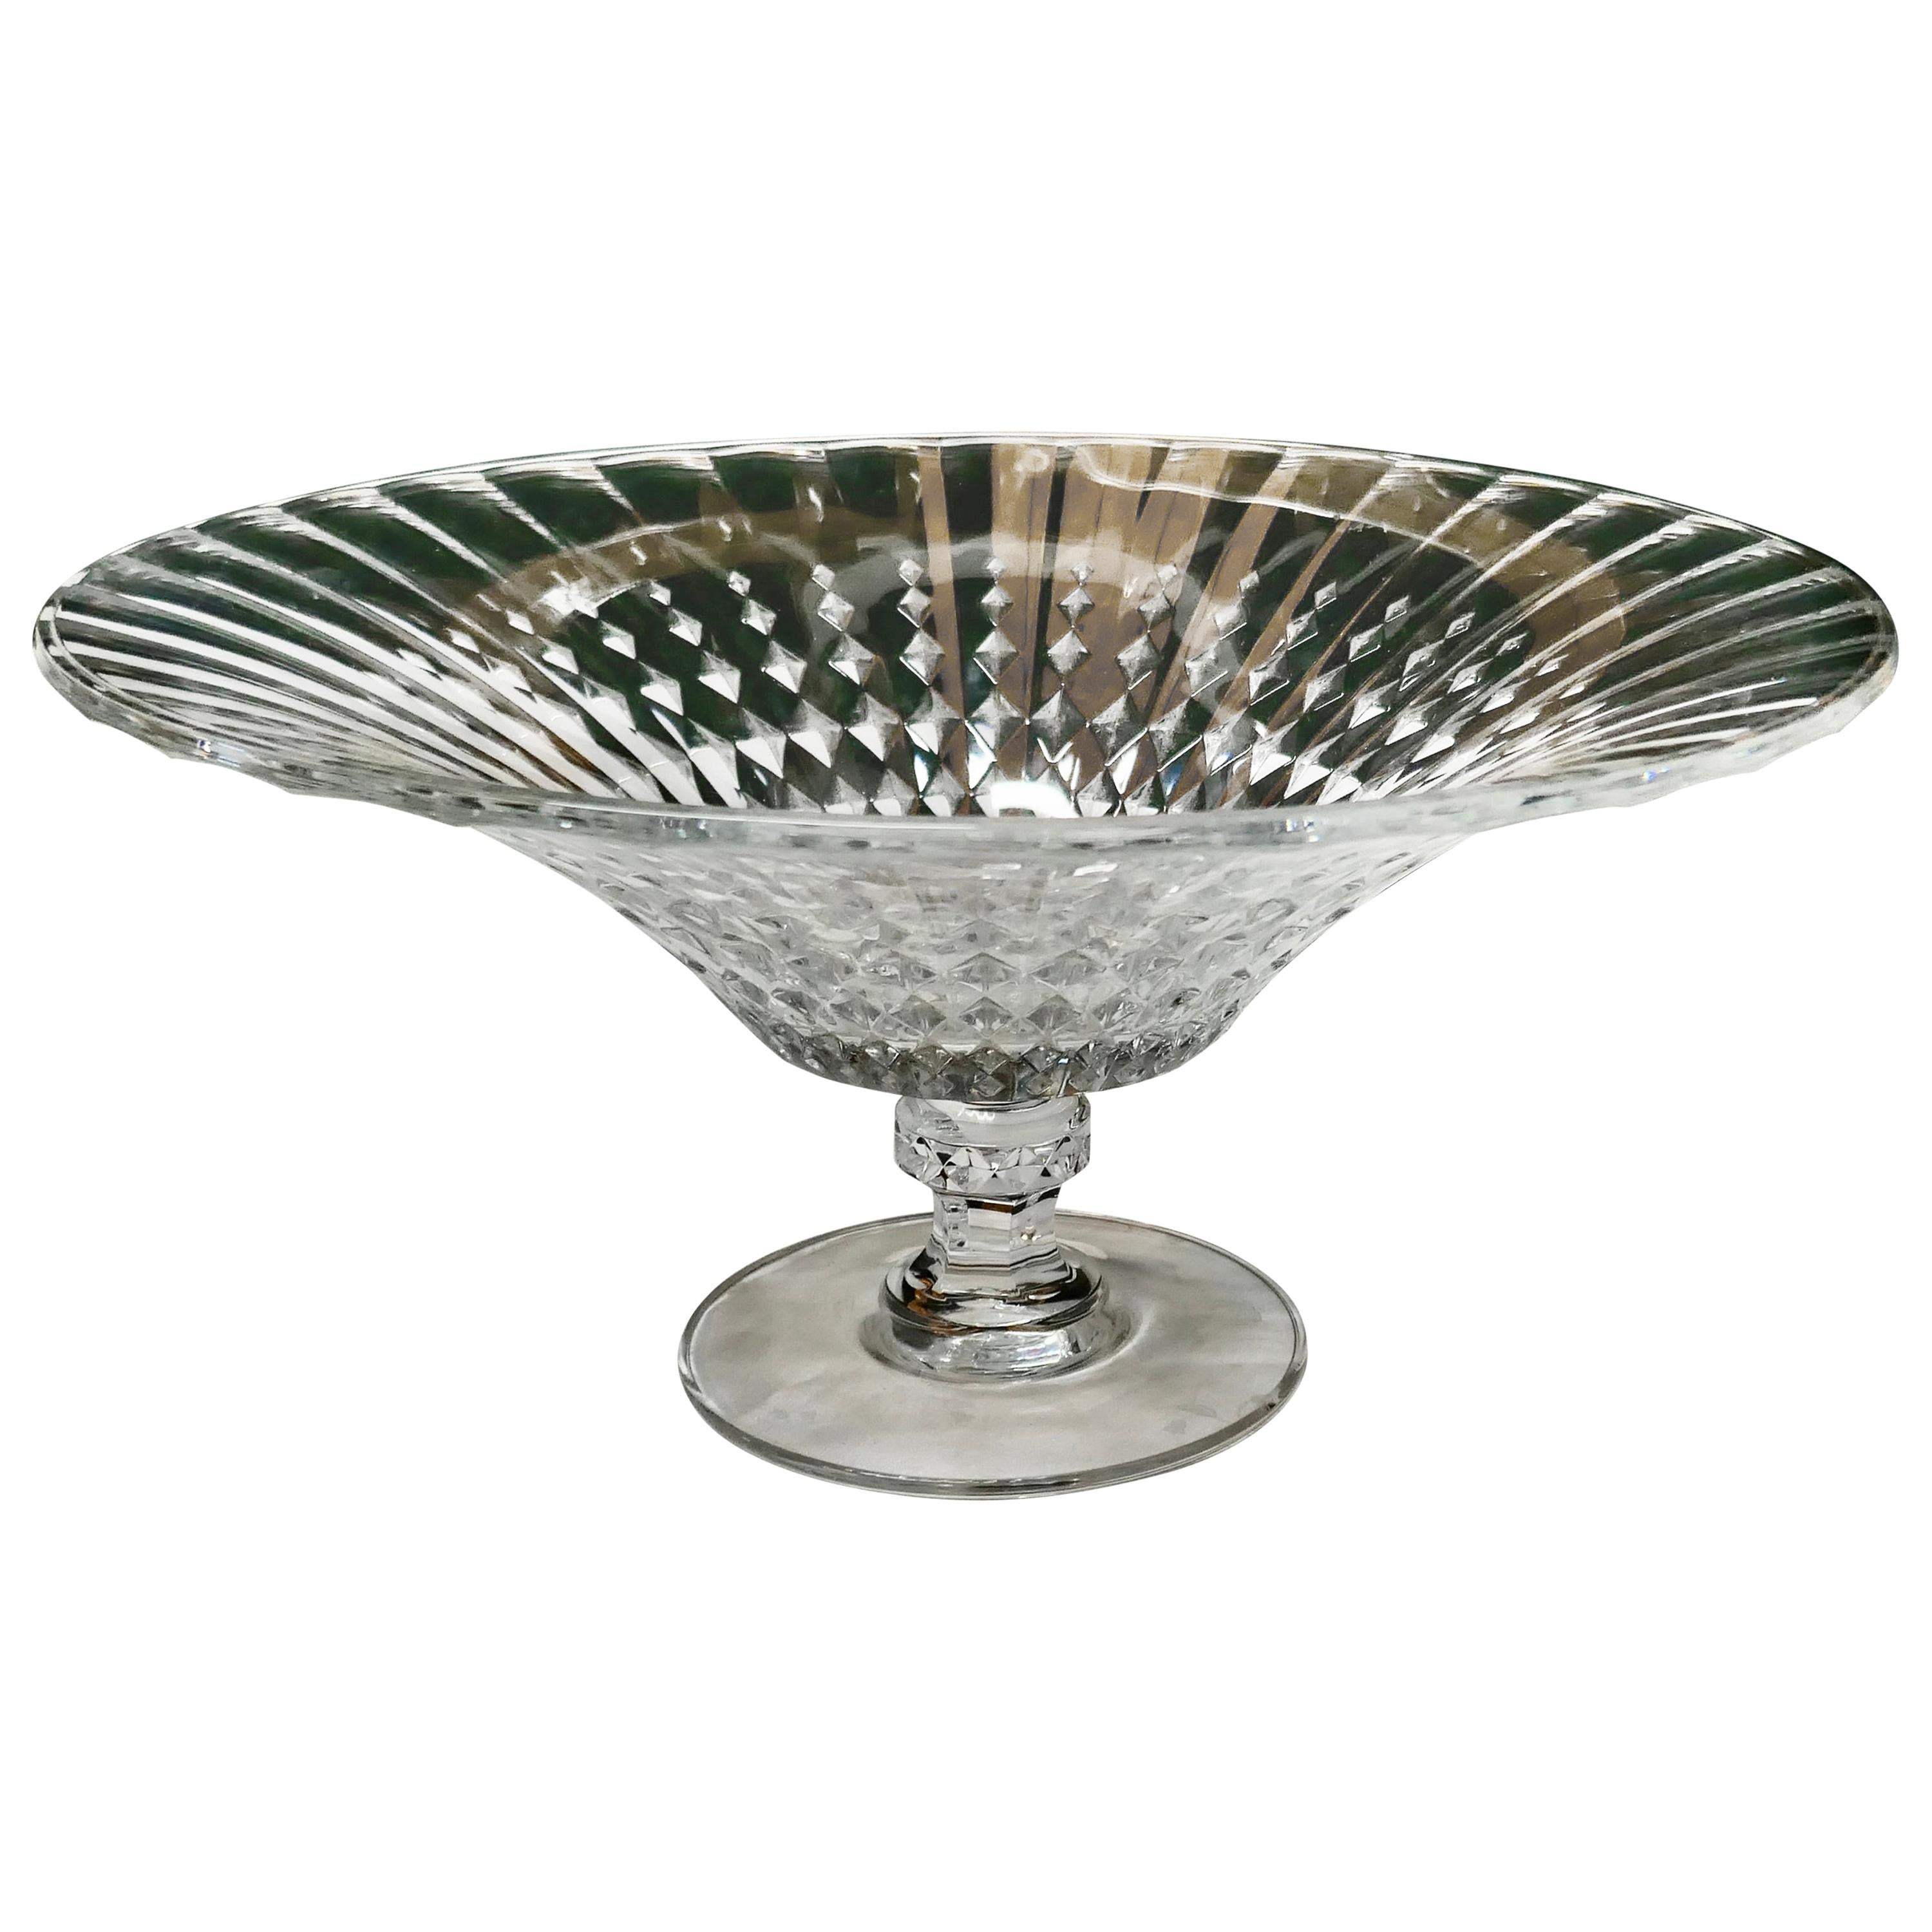 Large French Tazza Diamond Patterned Crystal Pedestal Fruit Dish For Sale